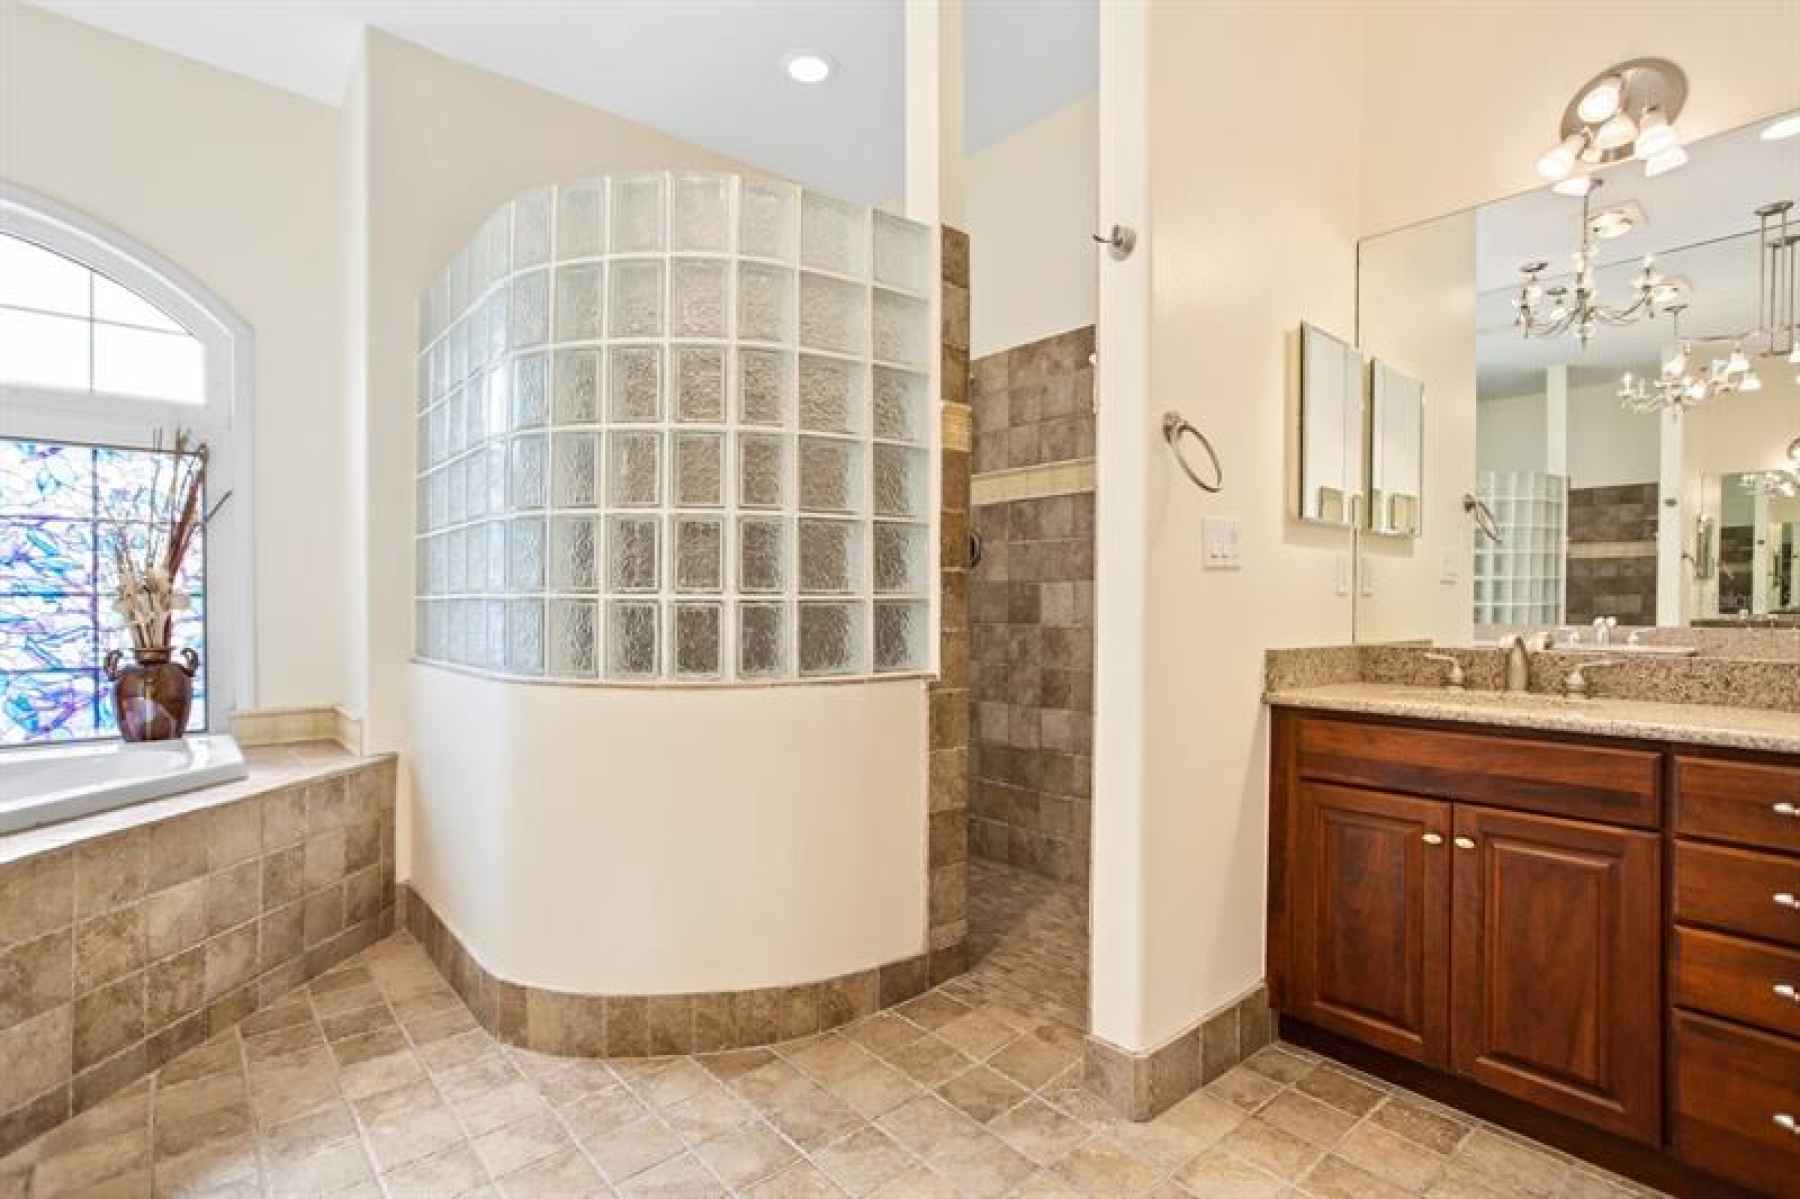 Walk-in shower with dual showerhead